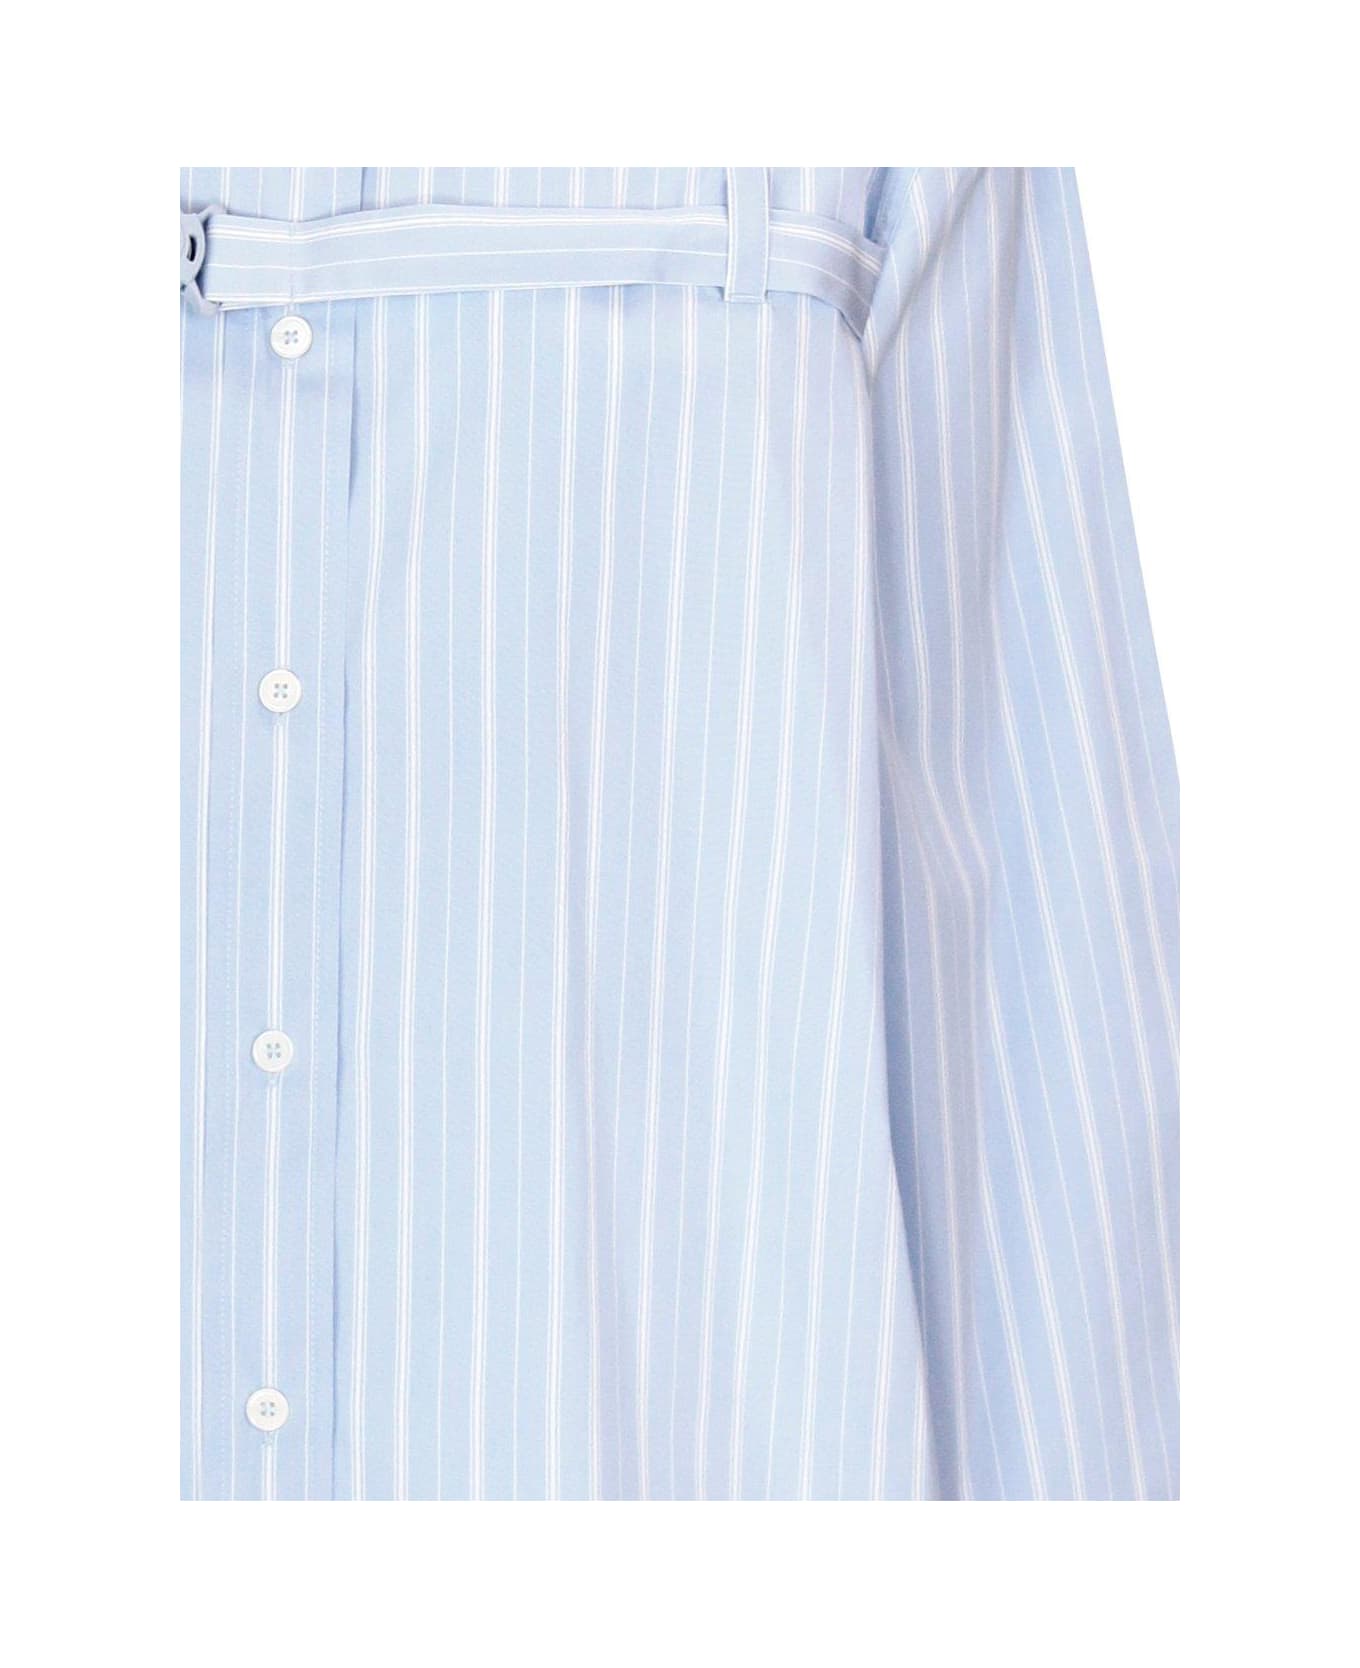 Off-White Striped Cut-out Shirt - BLUE